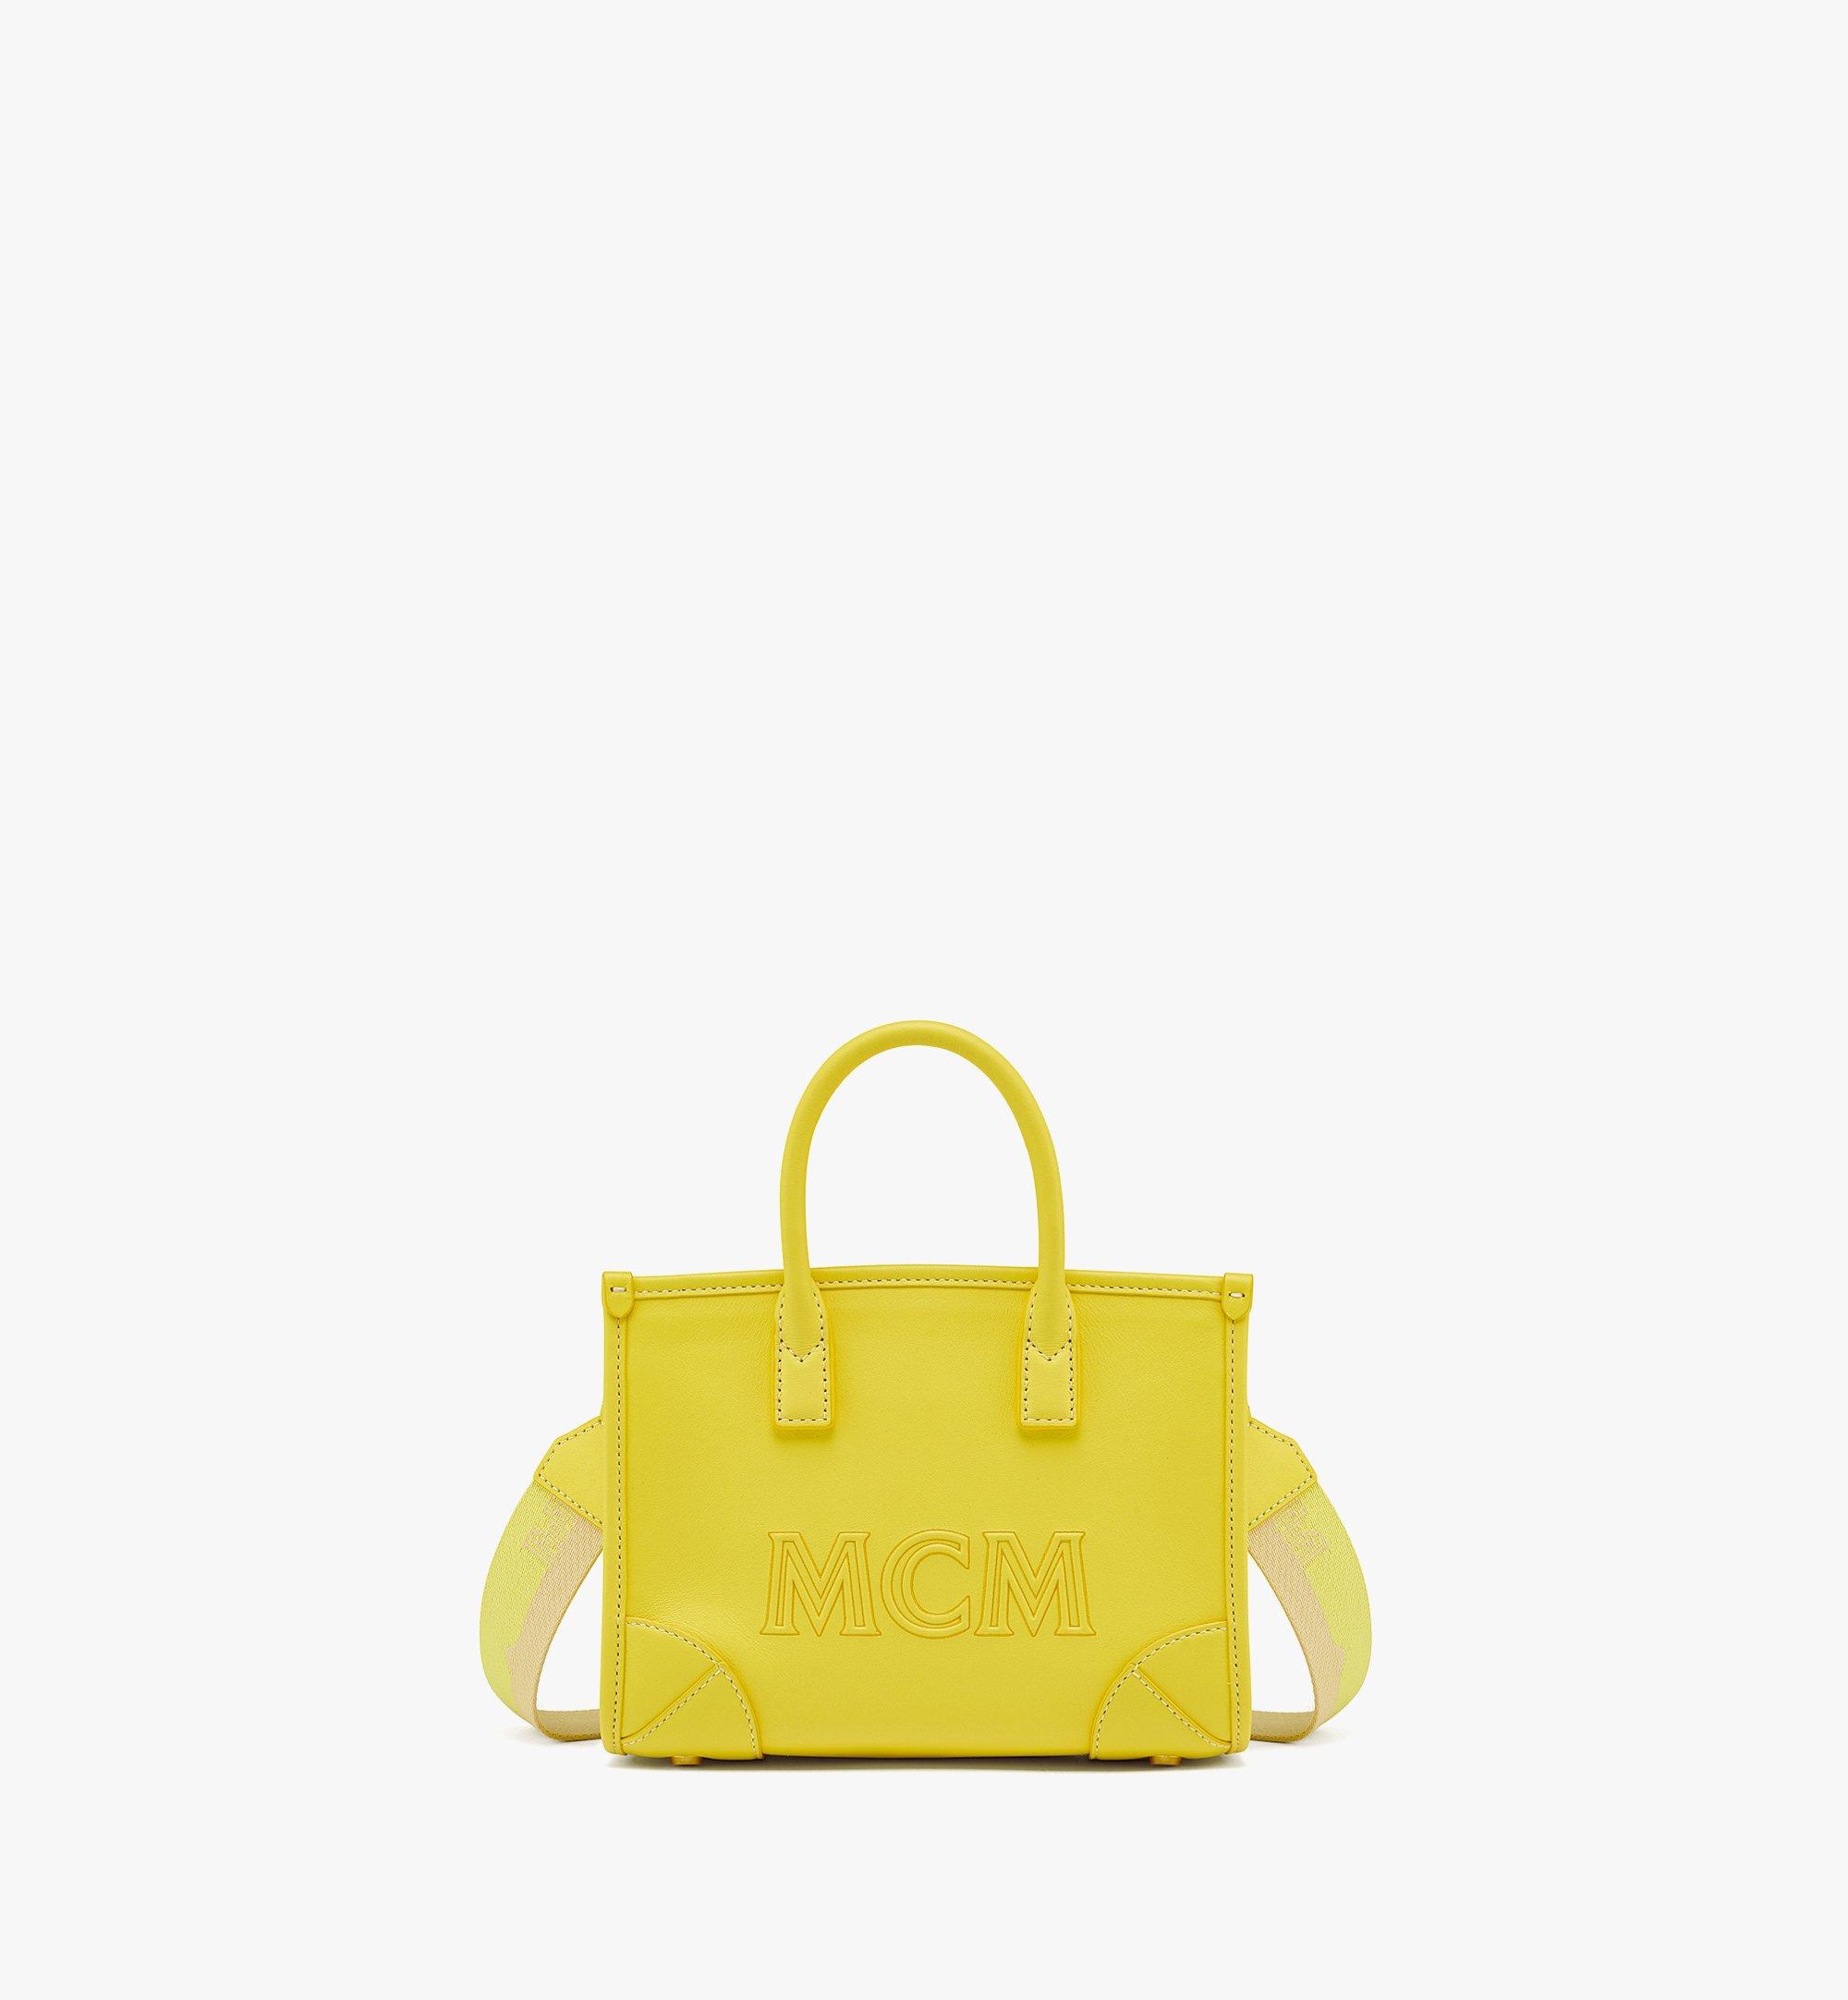 MCM München Tote in Spanish Calf Leather Yellow MWTCSSX02Y3001 Alternate View 1